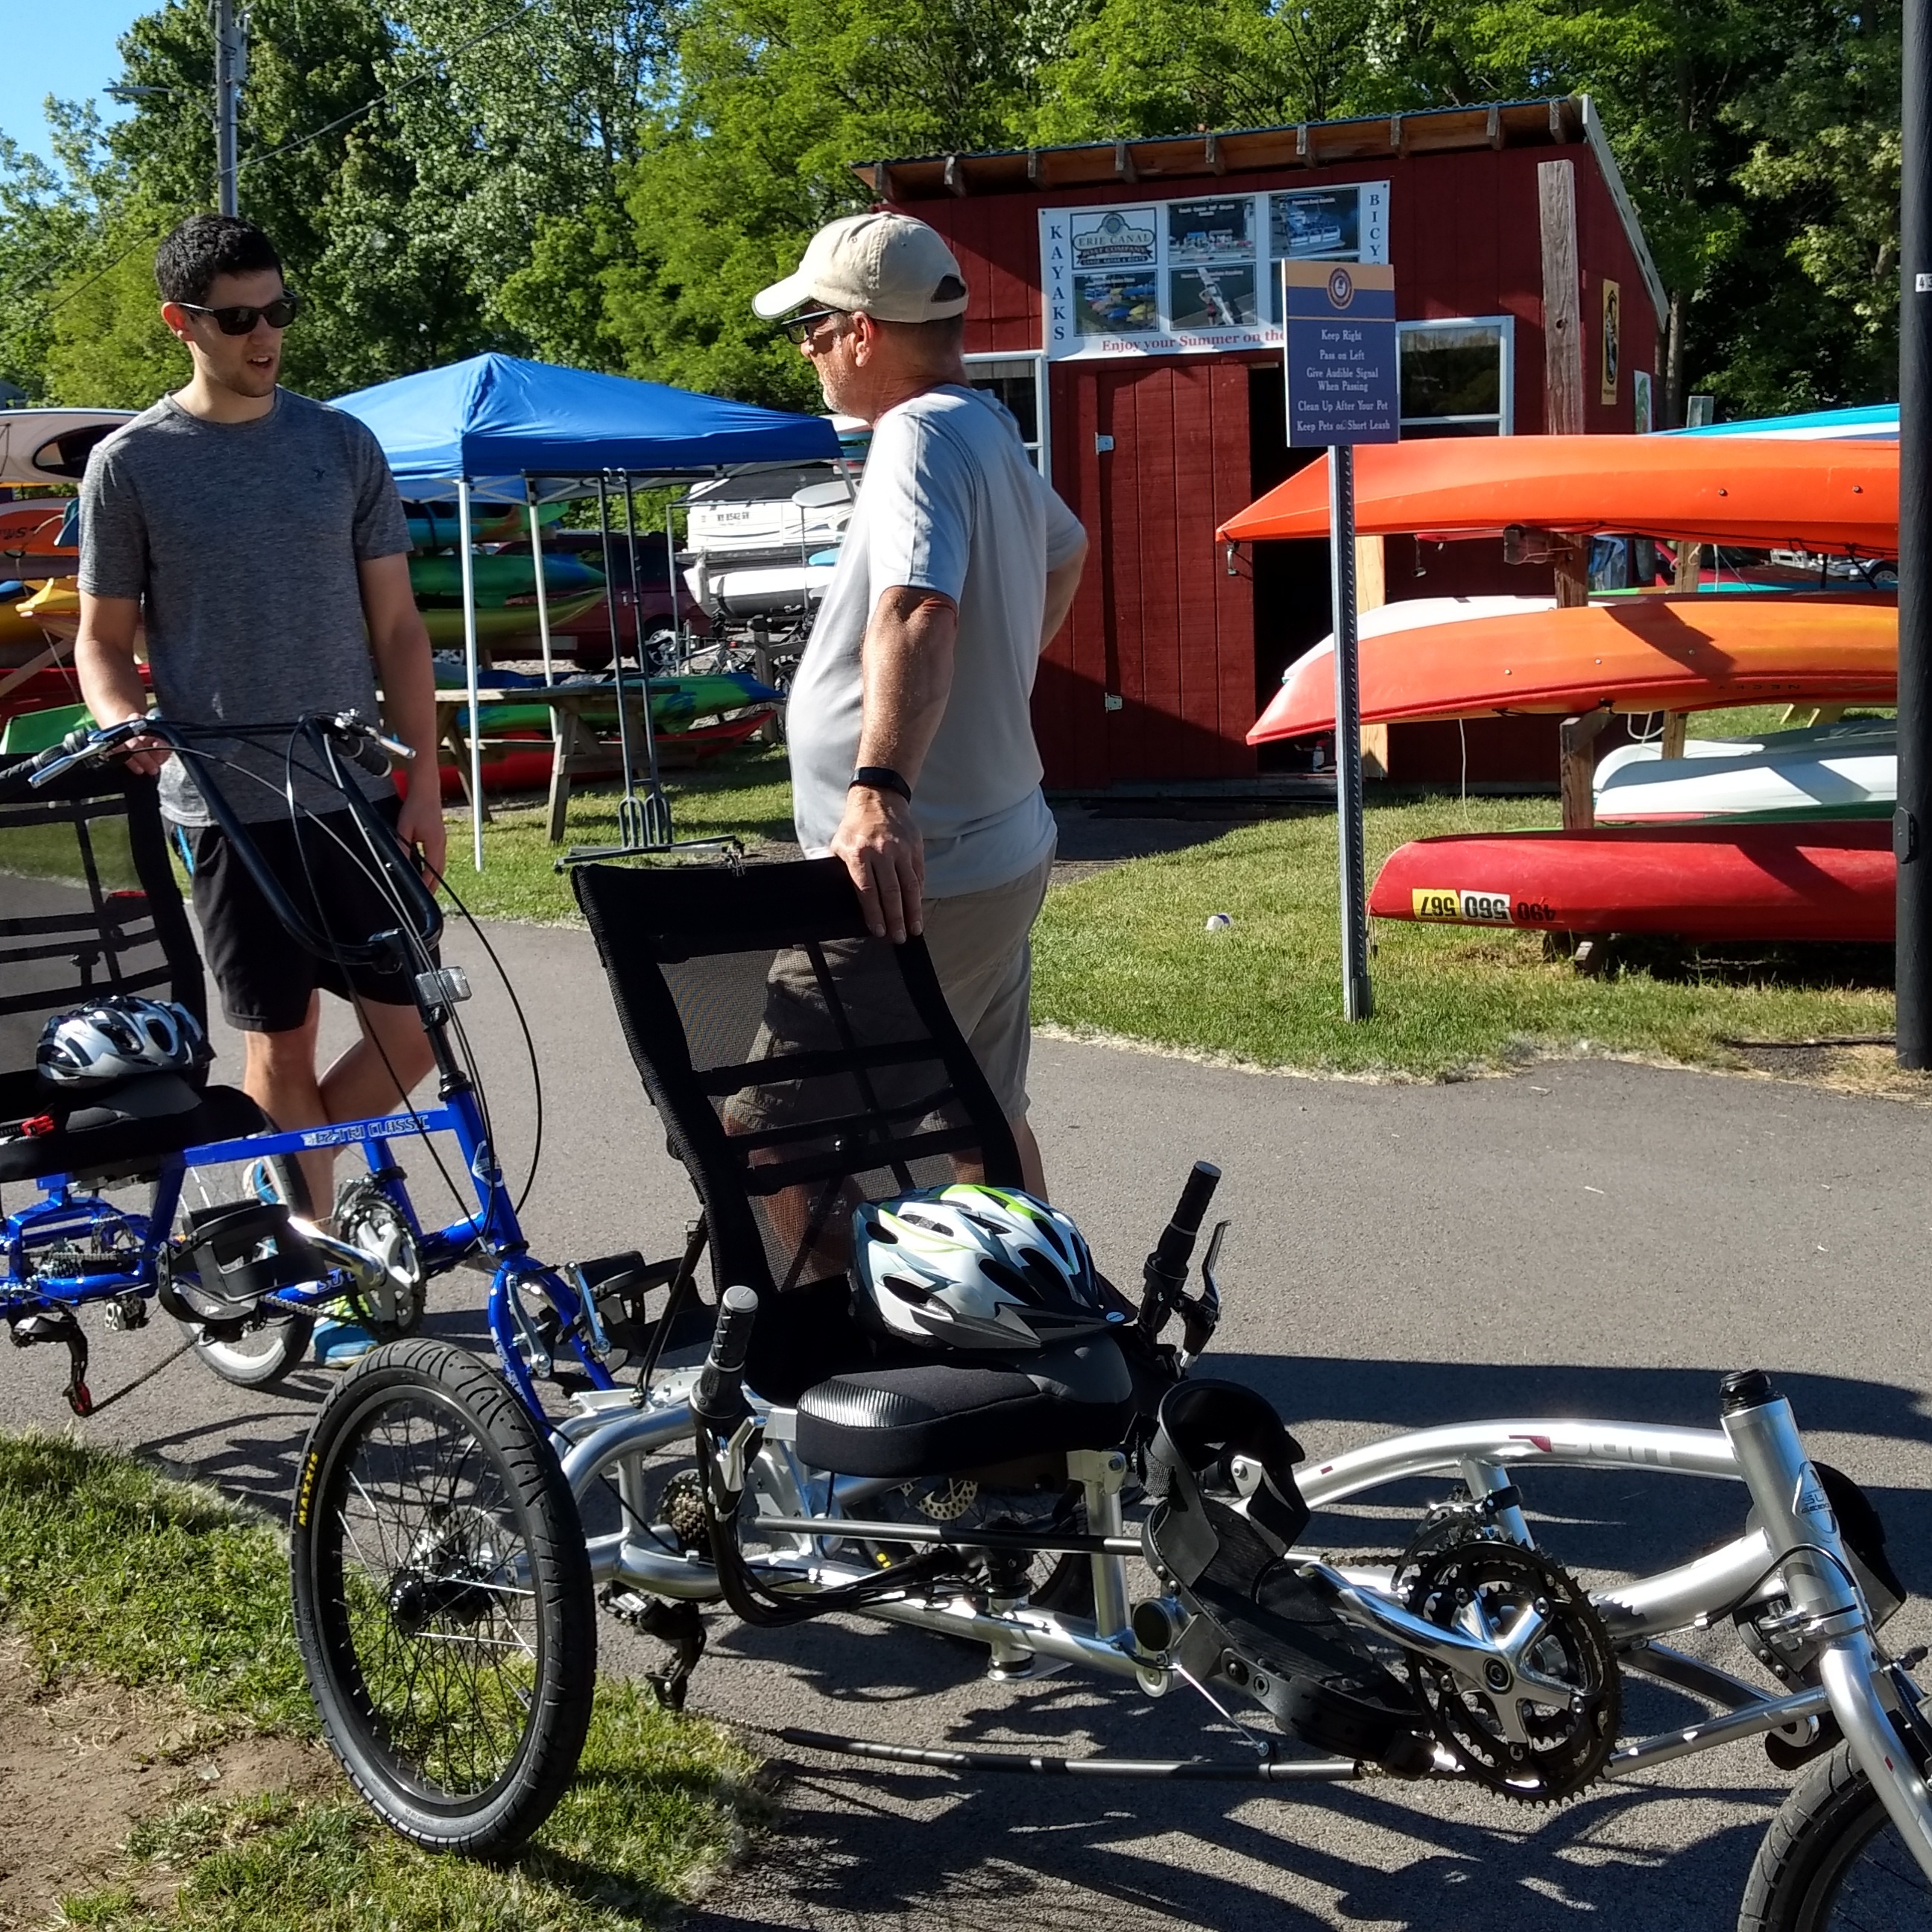 Two men are standing beside several adaptive three-wheeled cycles; kayaks on a rack behind them.